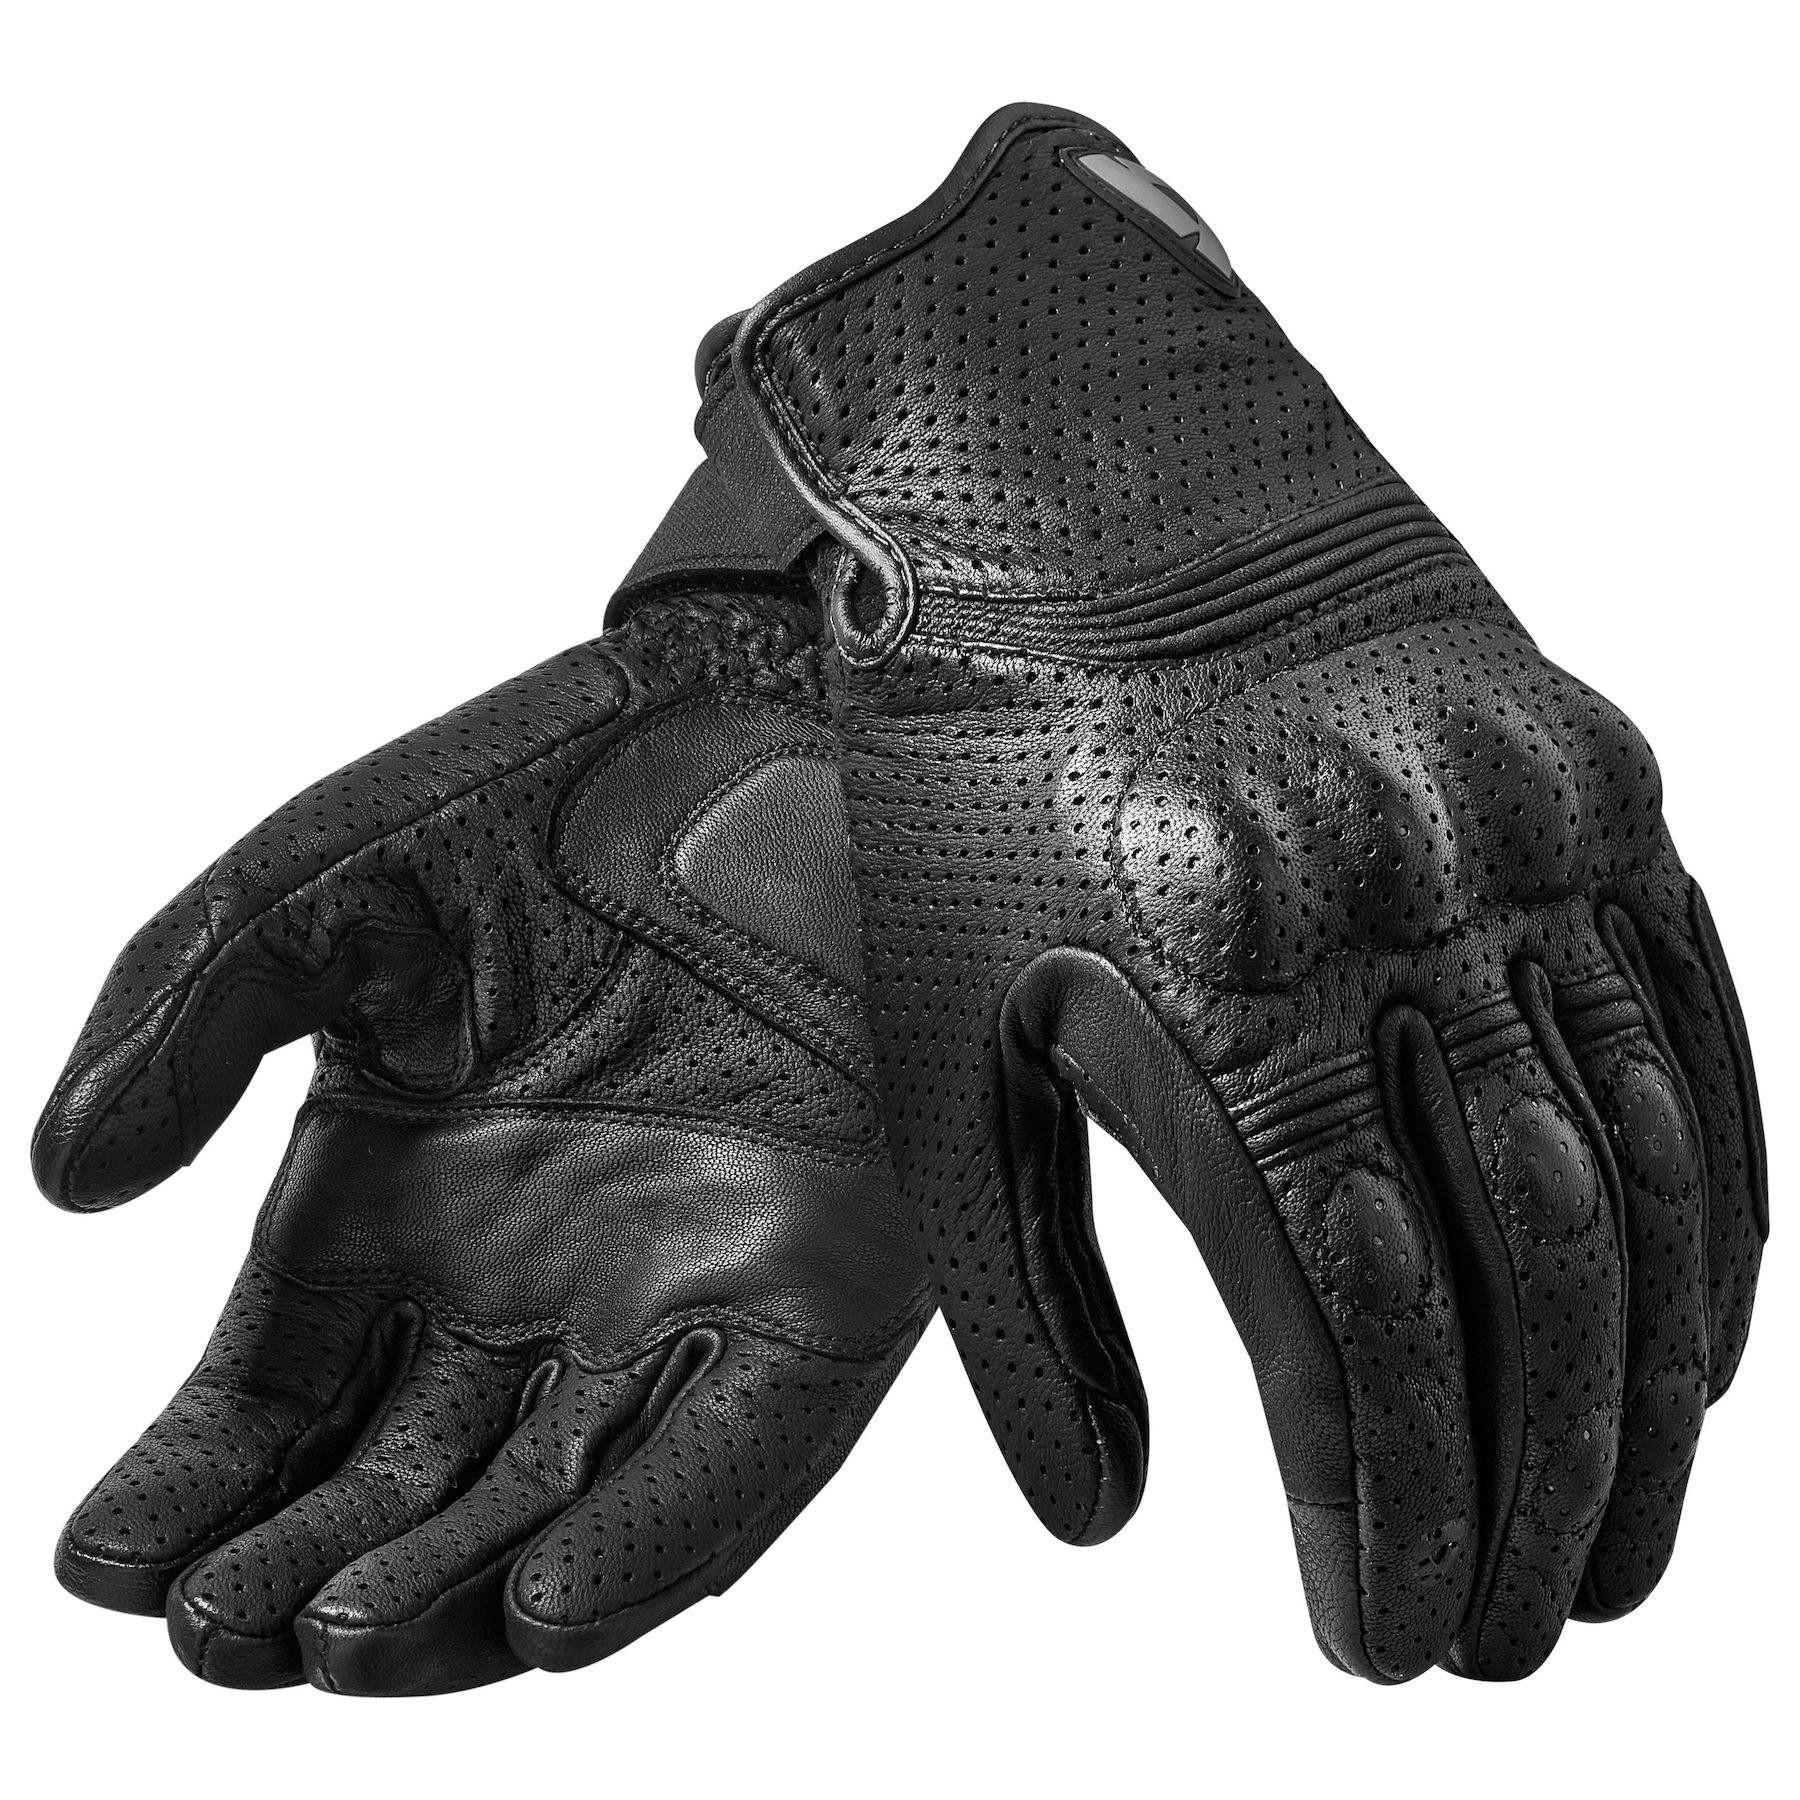 Motorbike Gear Motorcycle Gloves Knuckle Shell Protection Summer Goat Leather